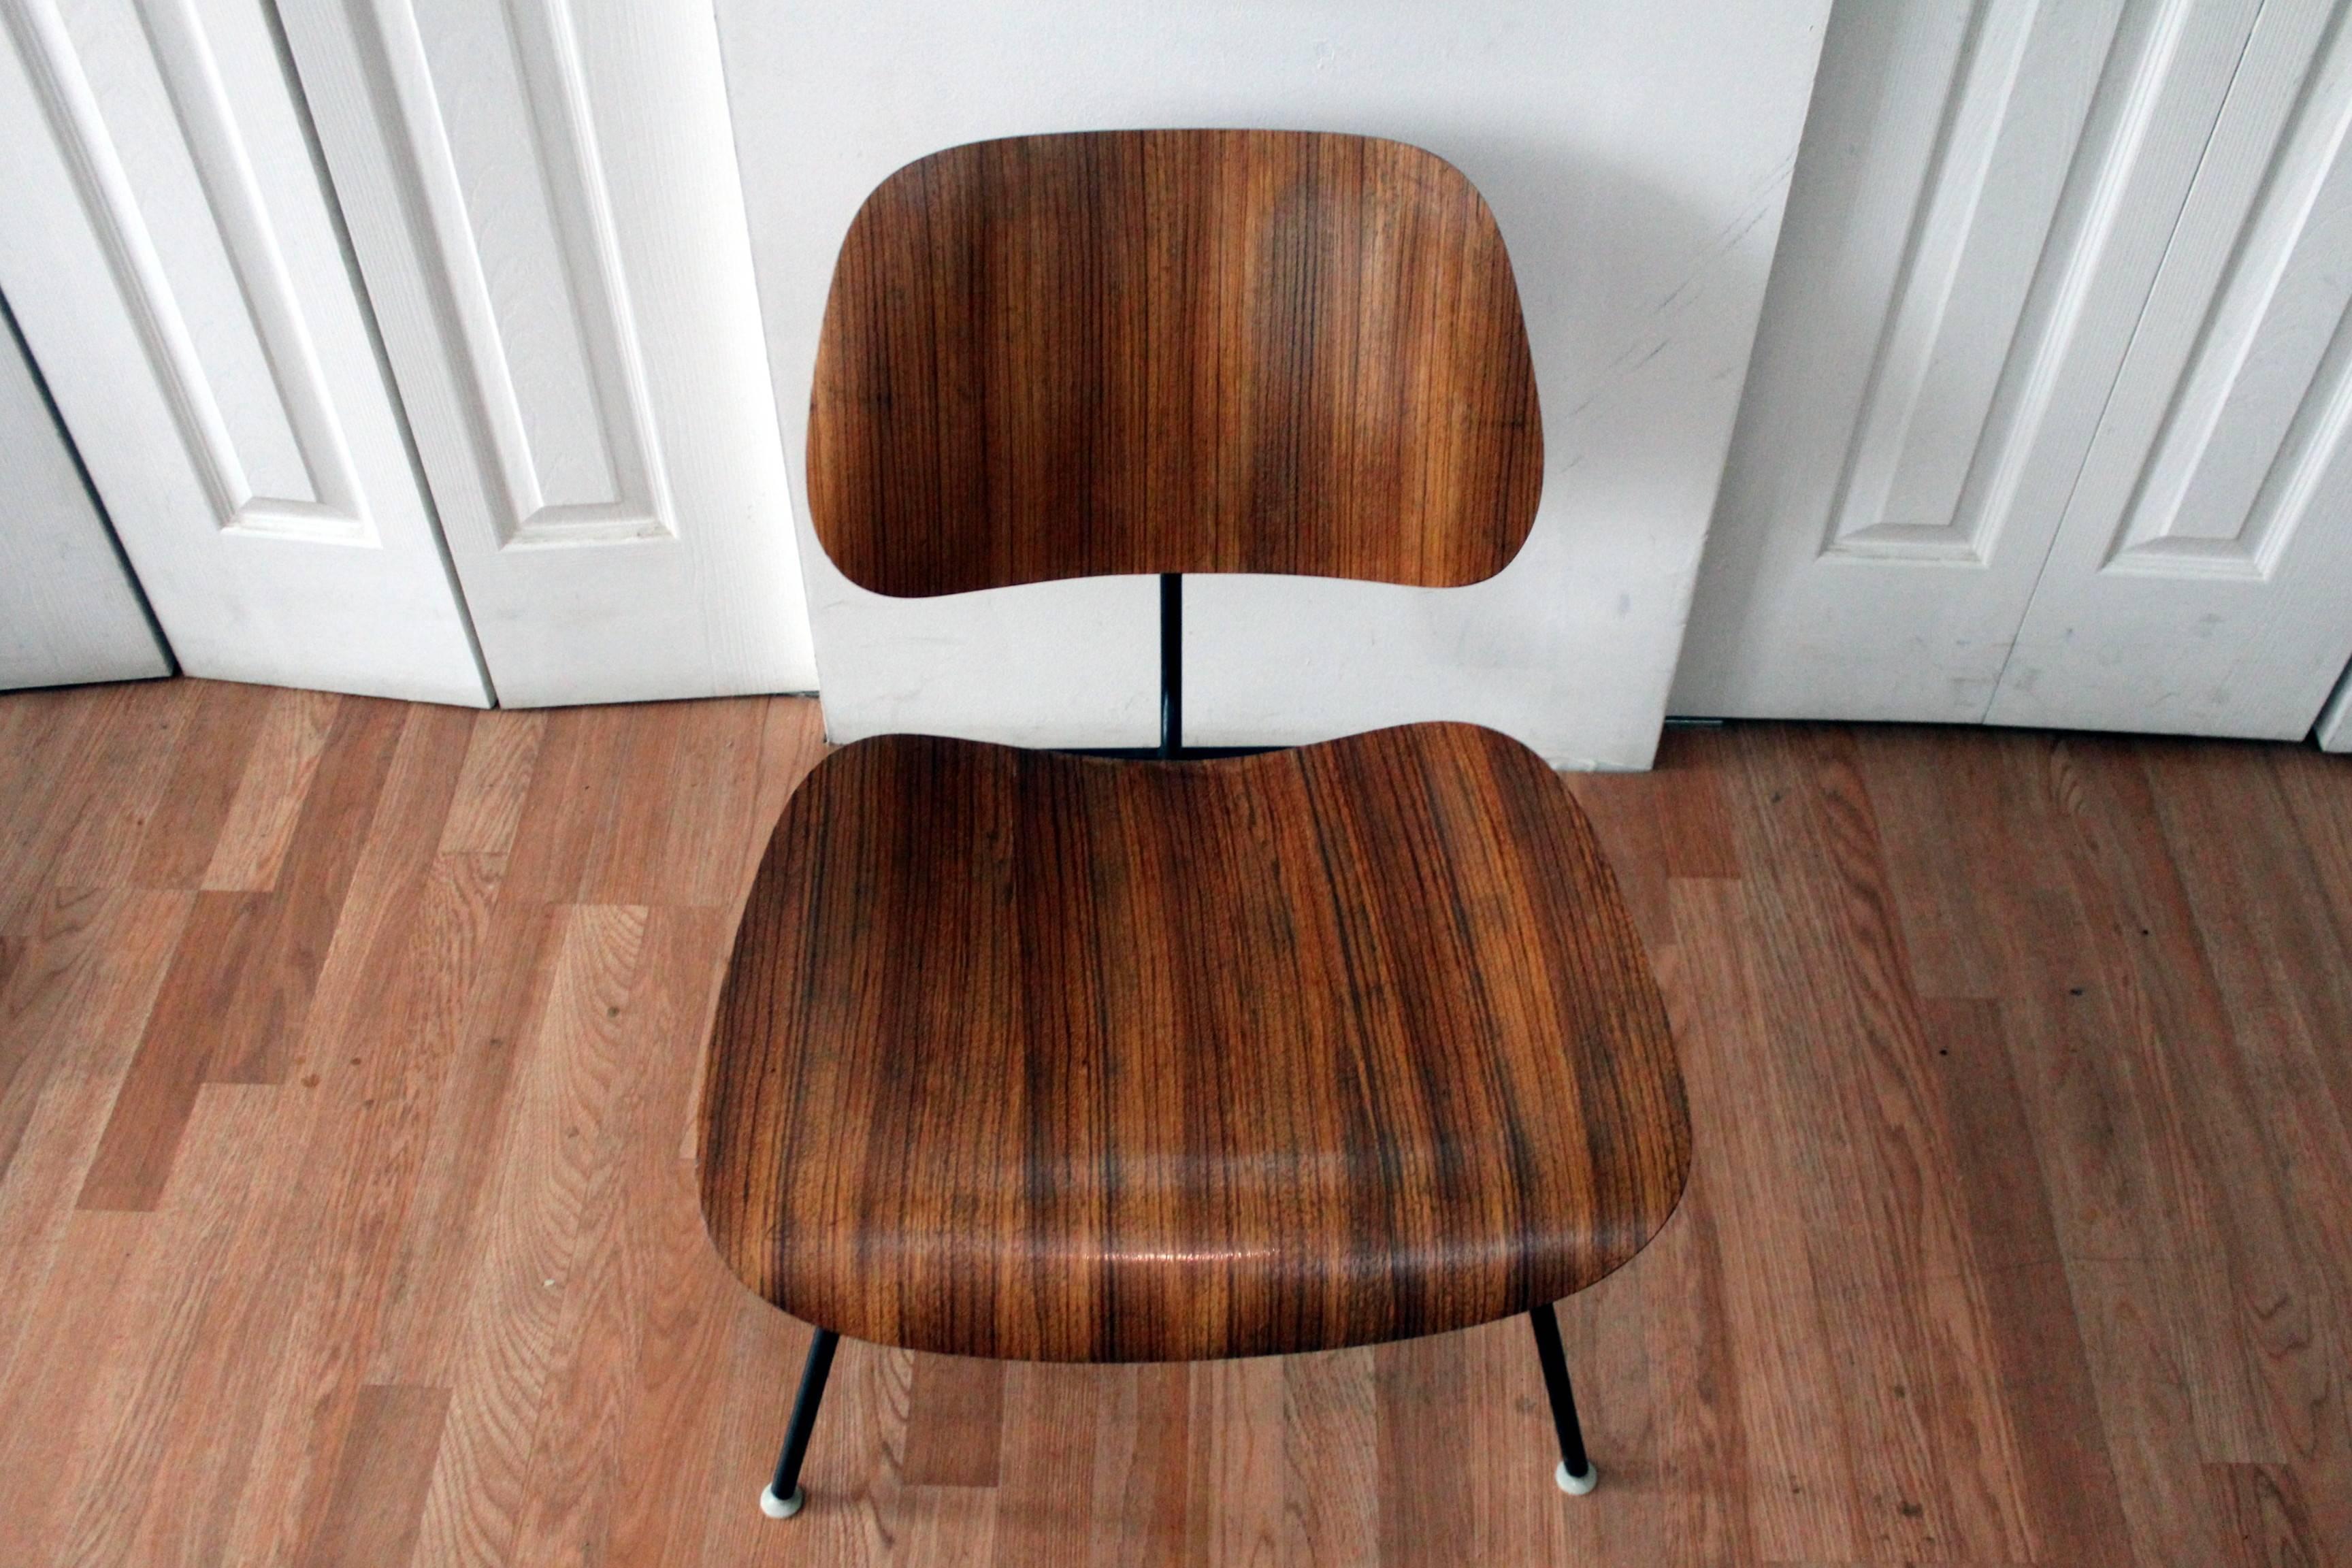 All original Classic early Eames LCM zebra wood lounge chair. Original labels, nylon glides, shock mounts, patina. A rare example of design at its best!